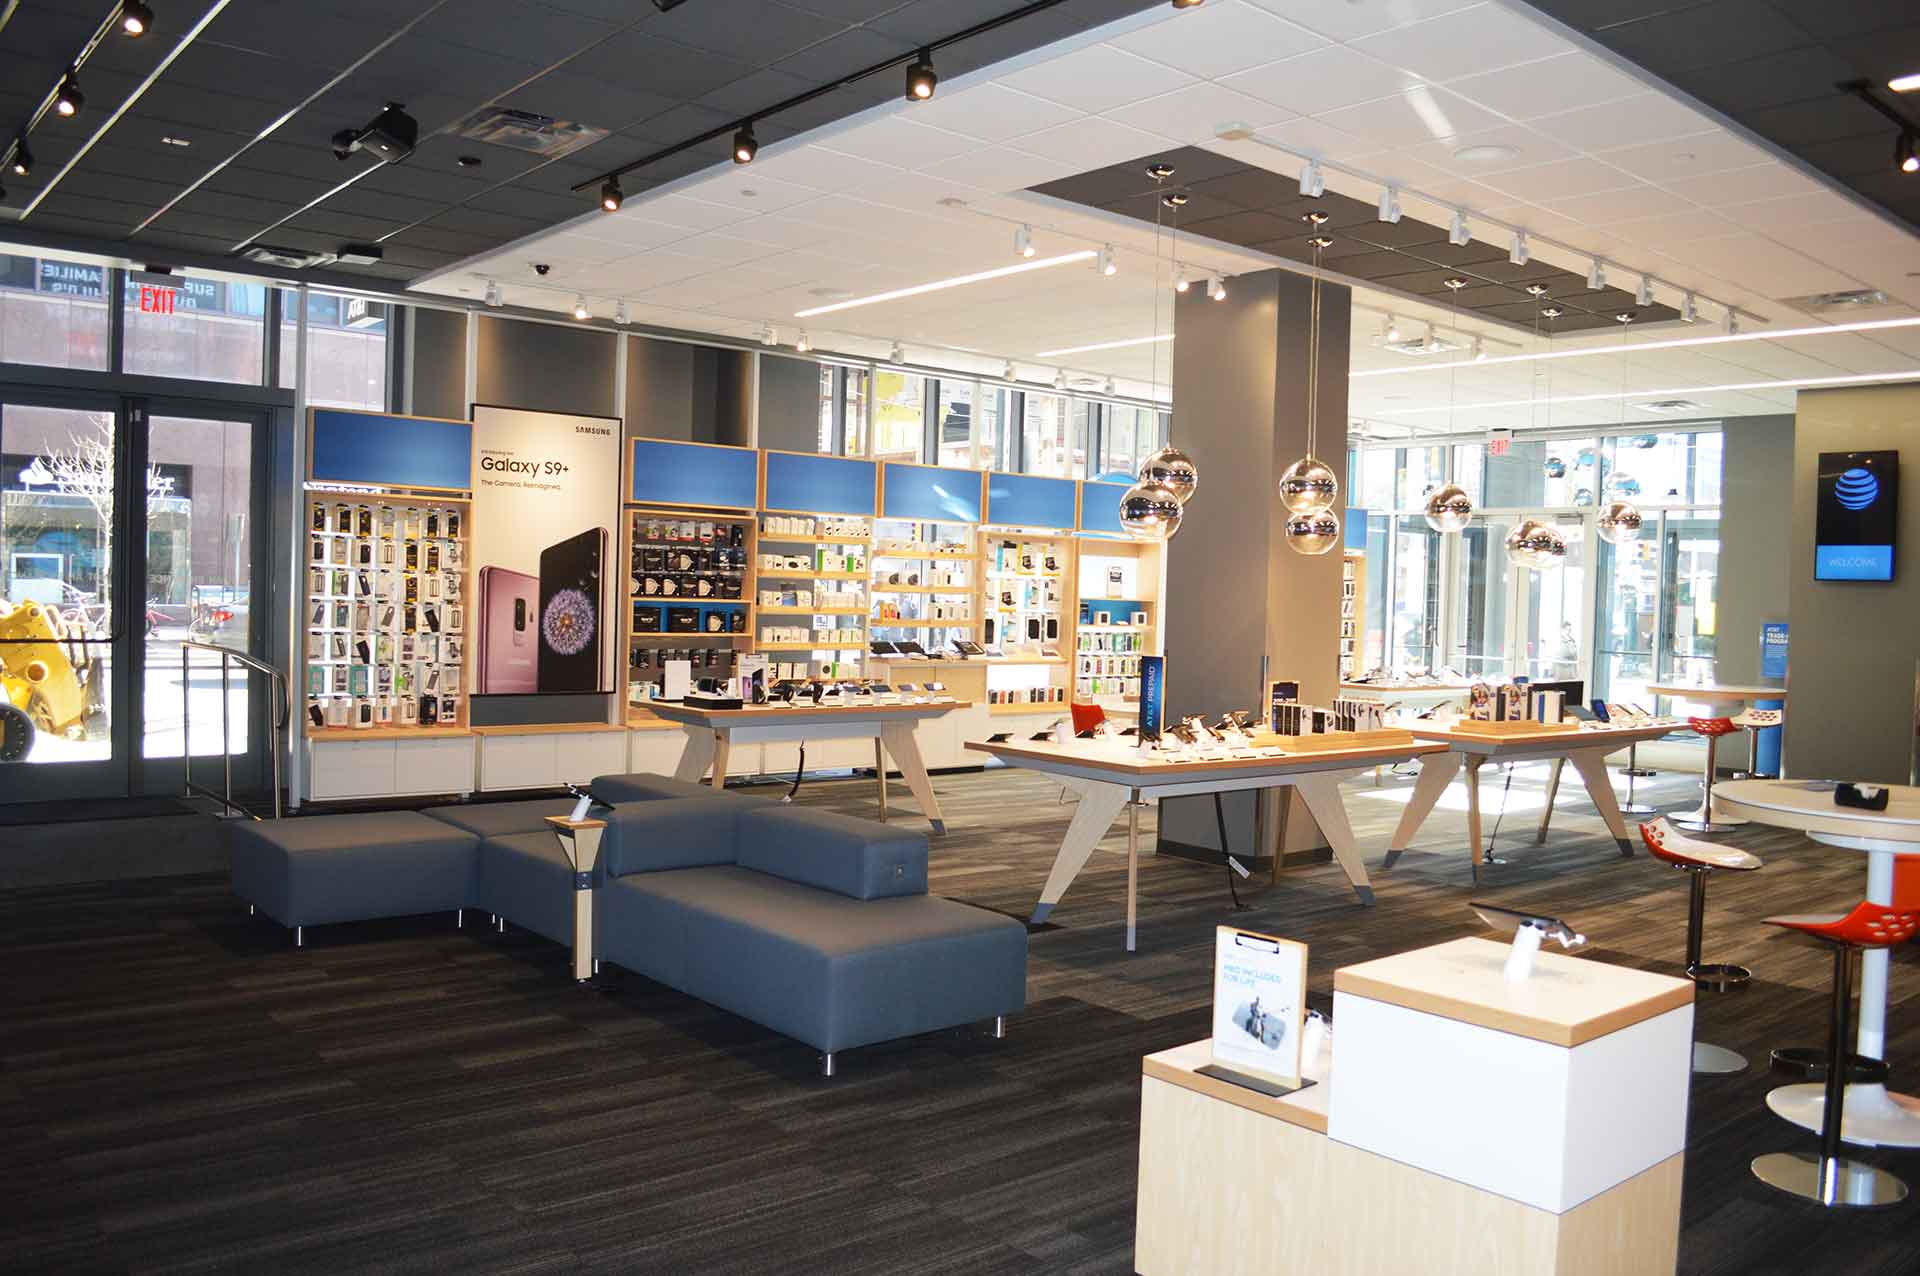 store layout of at&t market st store